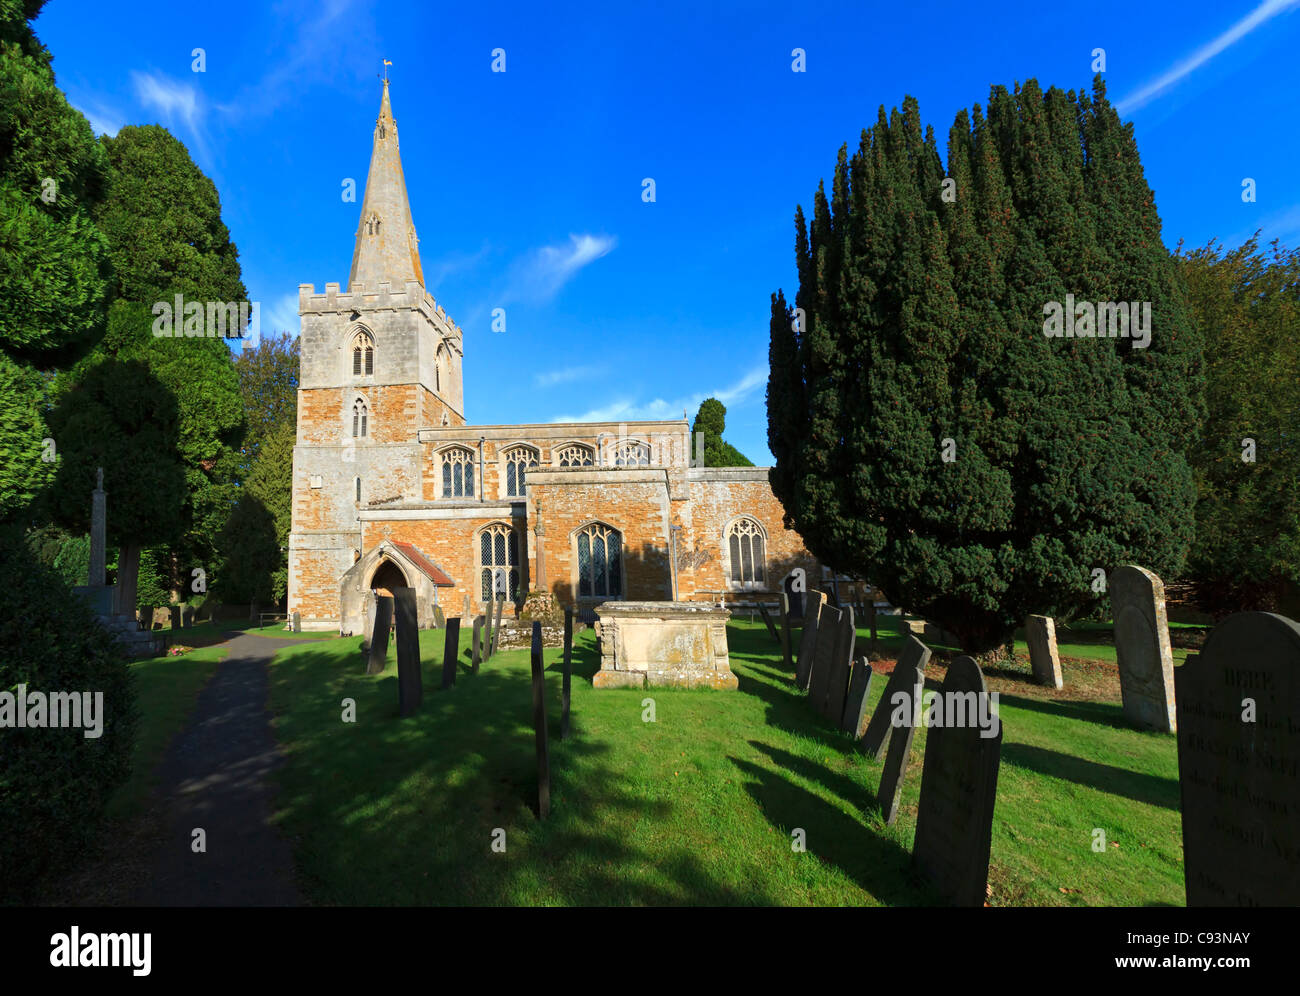 St Peter's Church, Wymondham, Leicestershire. Historic church in perpendicular style with a 13th century spire. Stock Photo